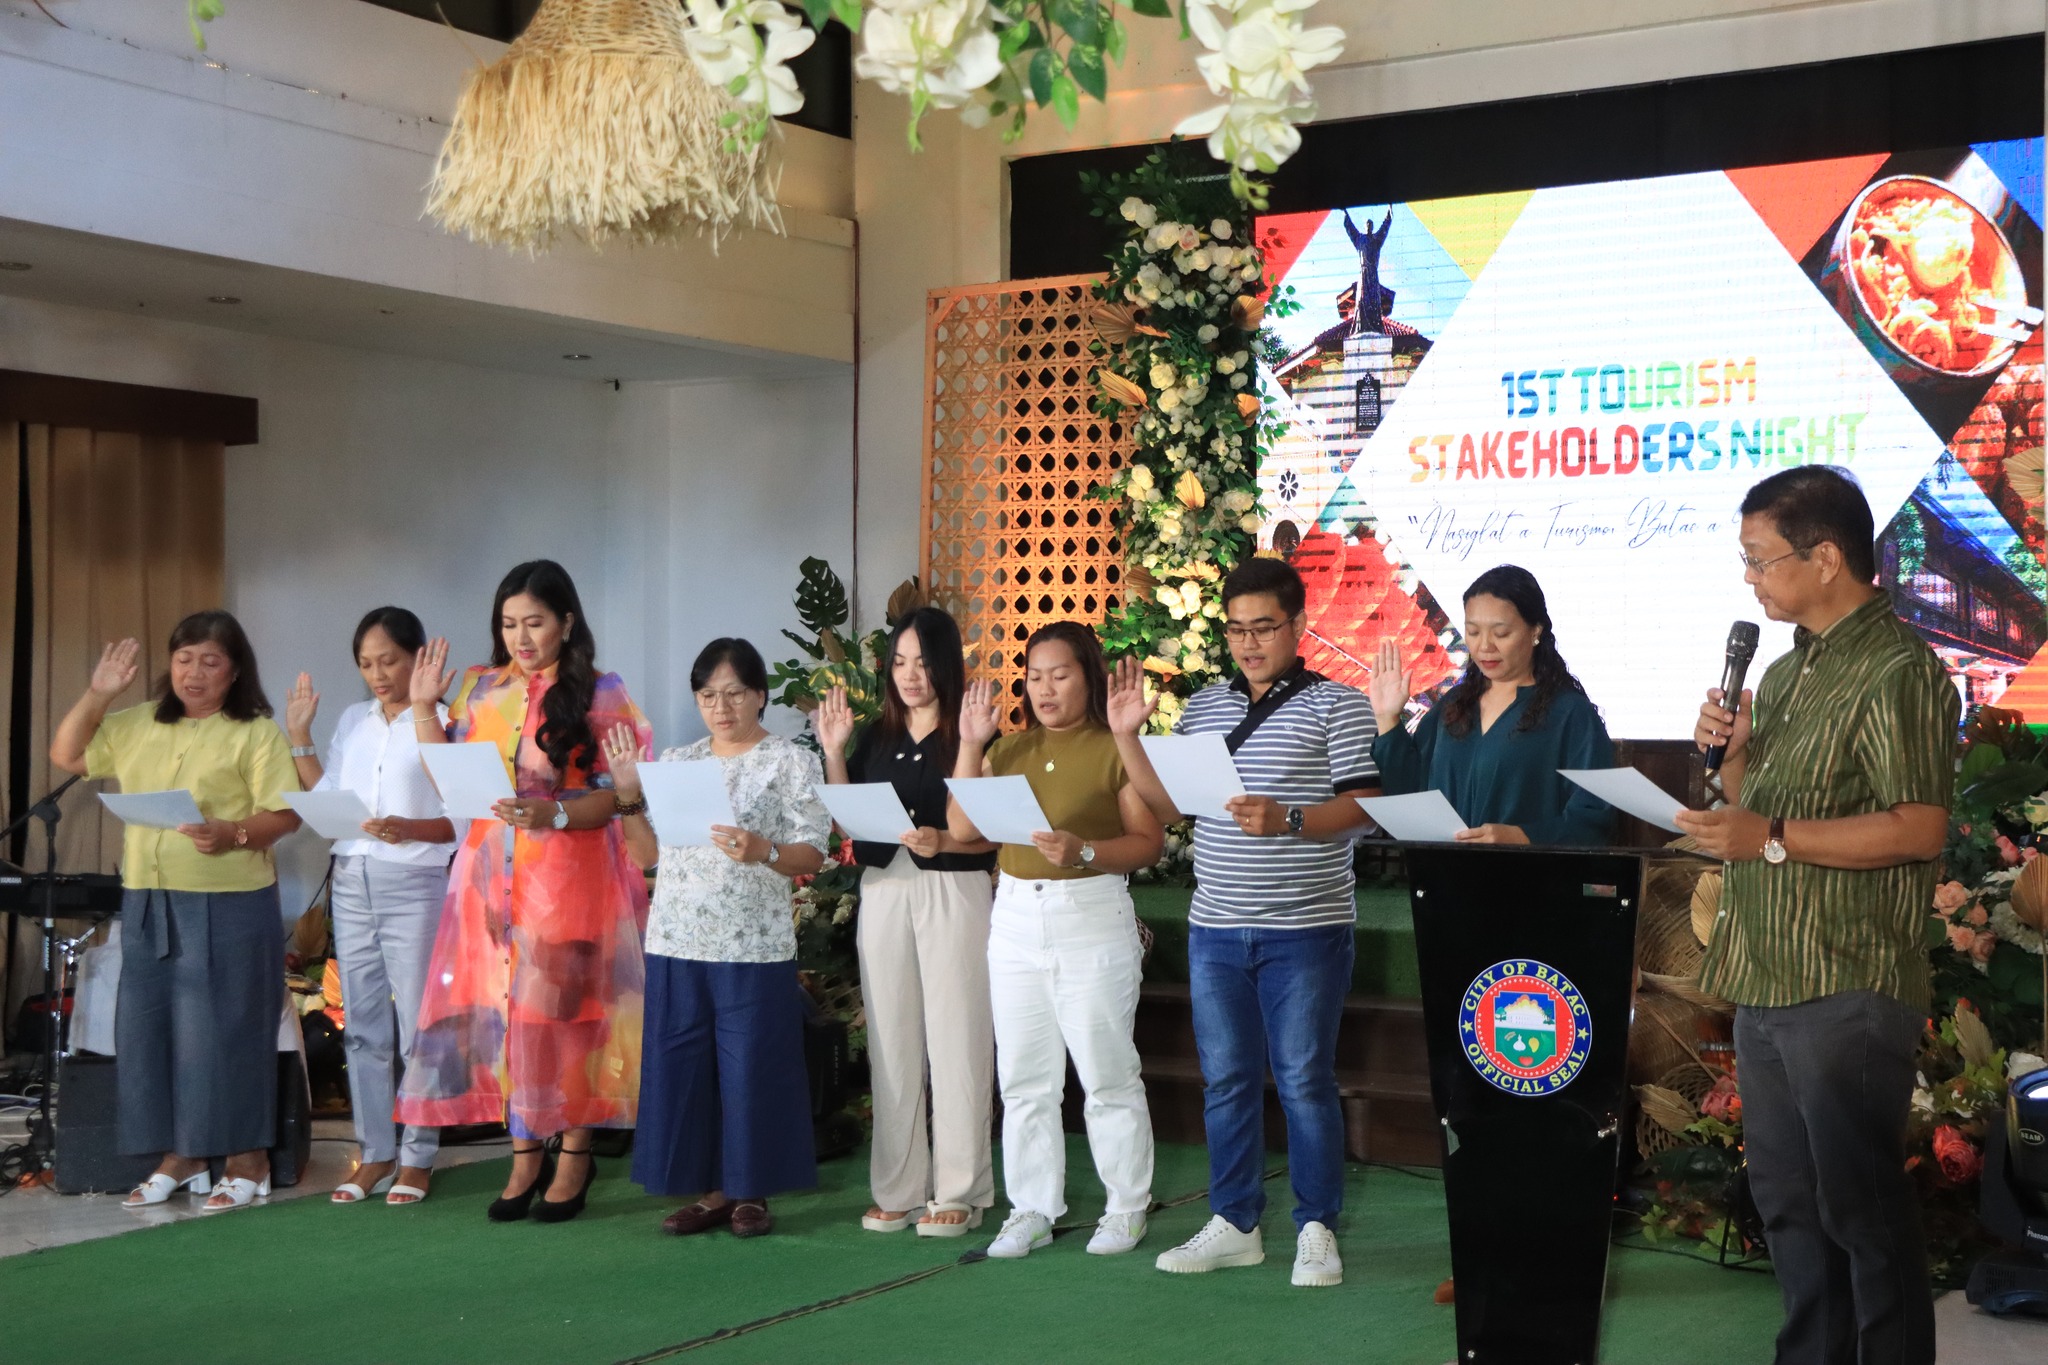 CITY GOVERNMENT OF BATAC CELEBRATES TOURISM WITH STAKEHOLDER’S NIGHT